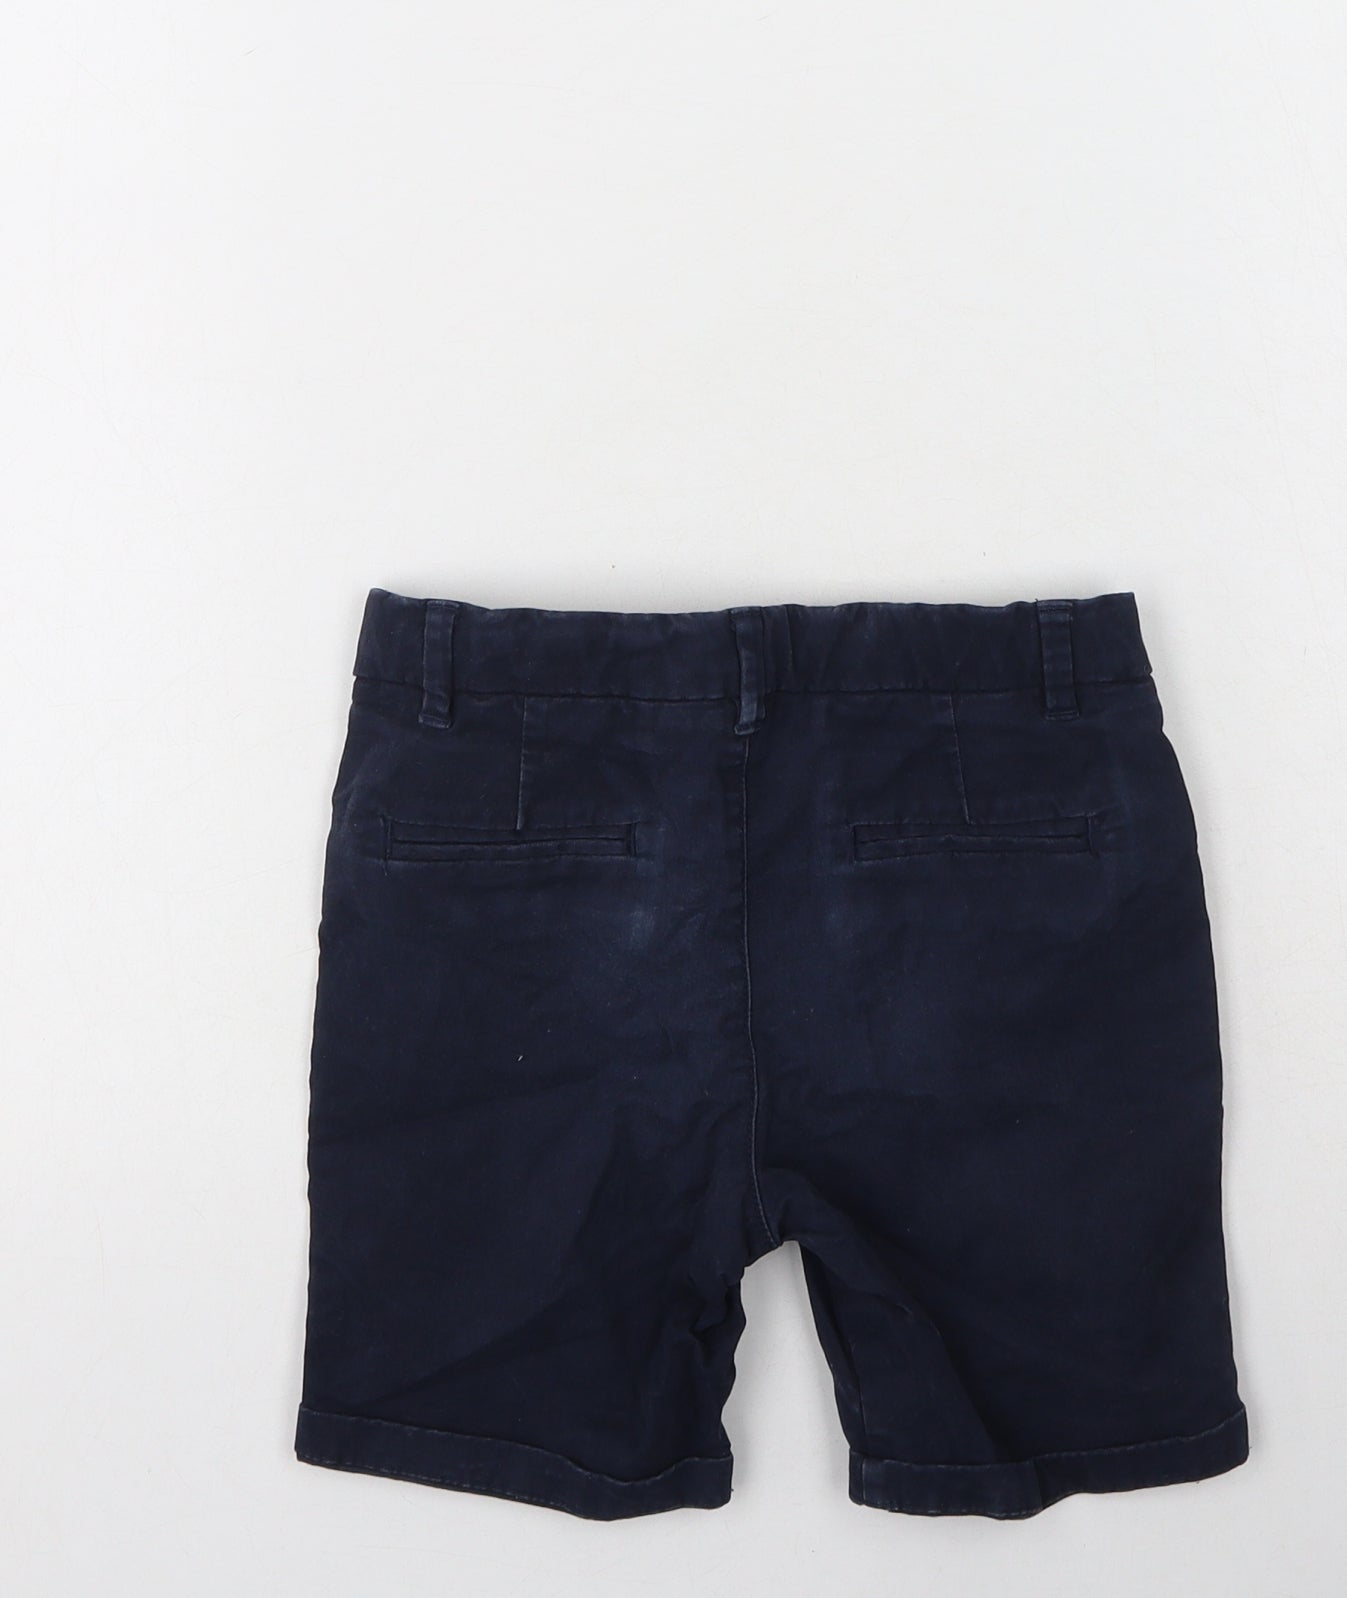 Marks and Spencer Boys Blue  Cotton Cargo Shorts Size 5-6 Years  Regular